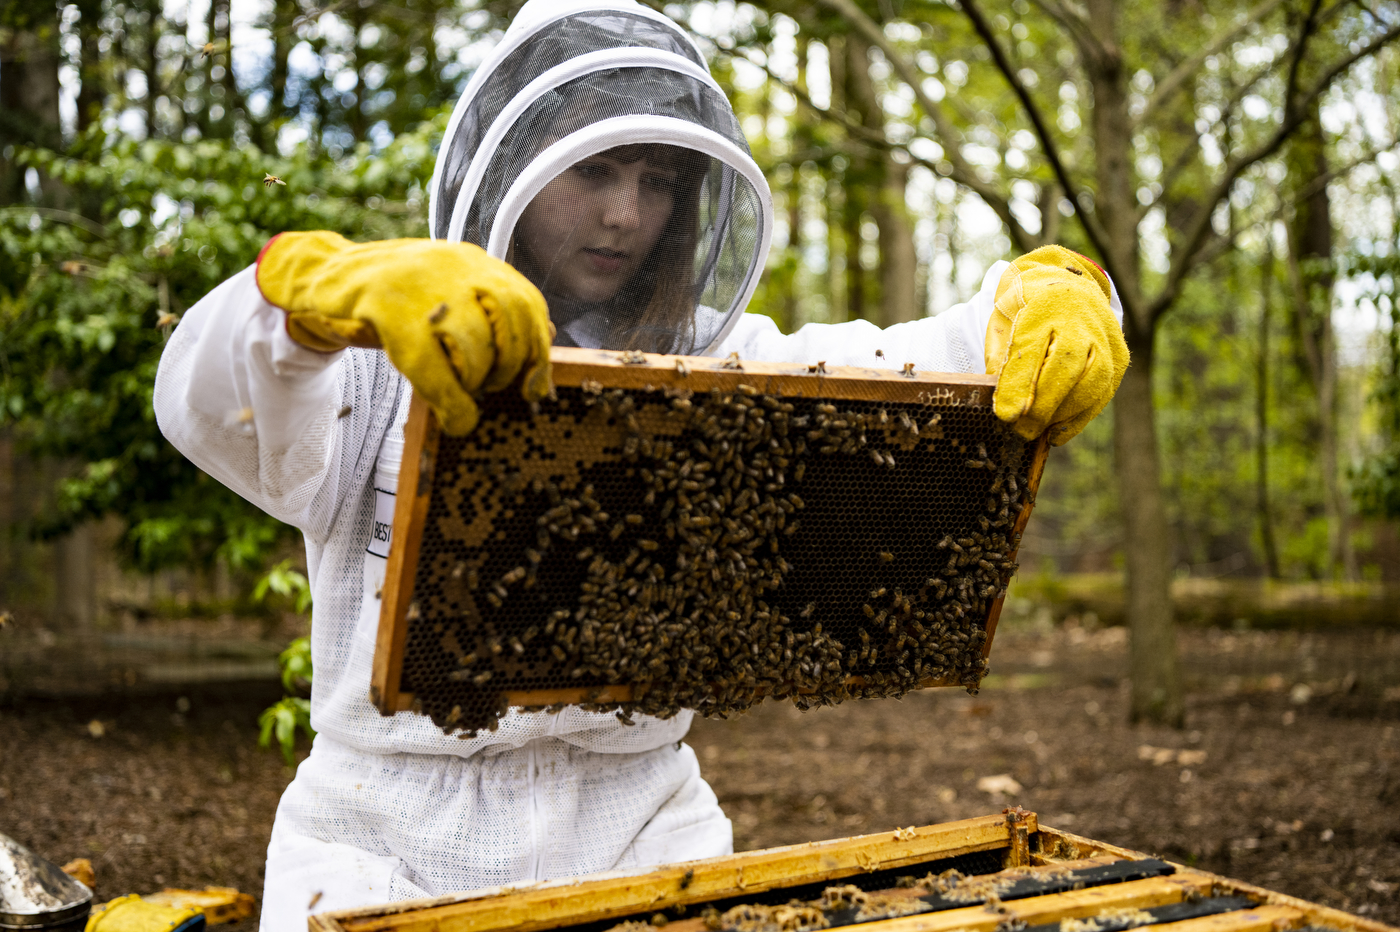 Katherine Antos examines a hive of bees.